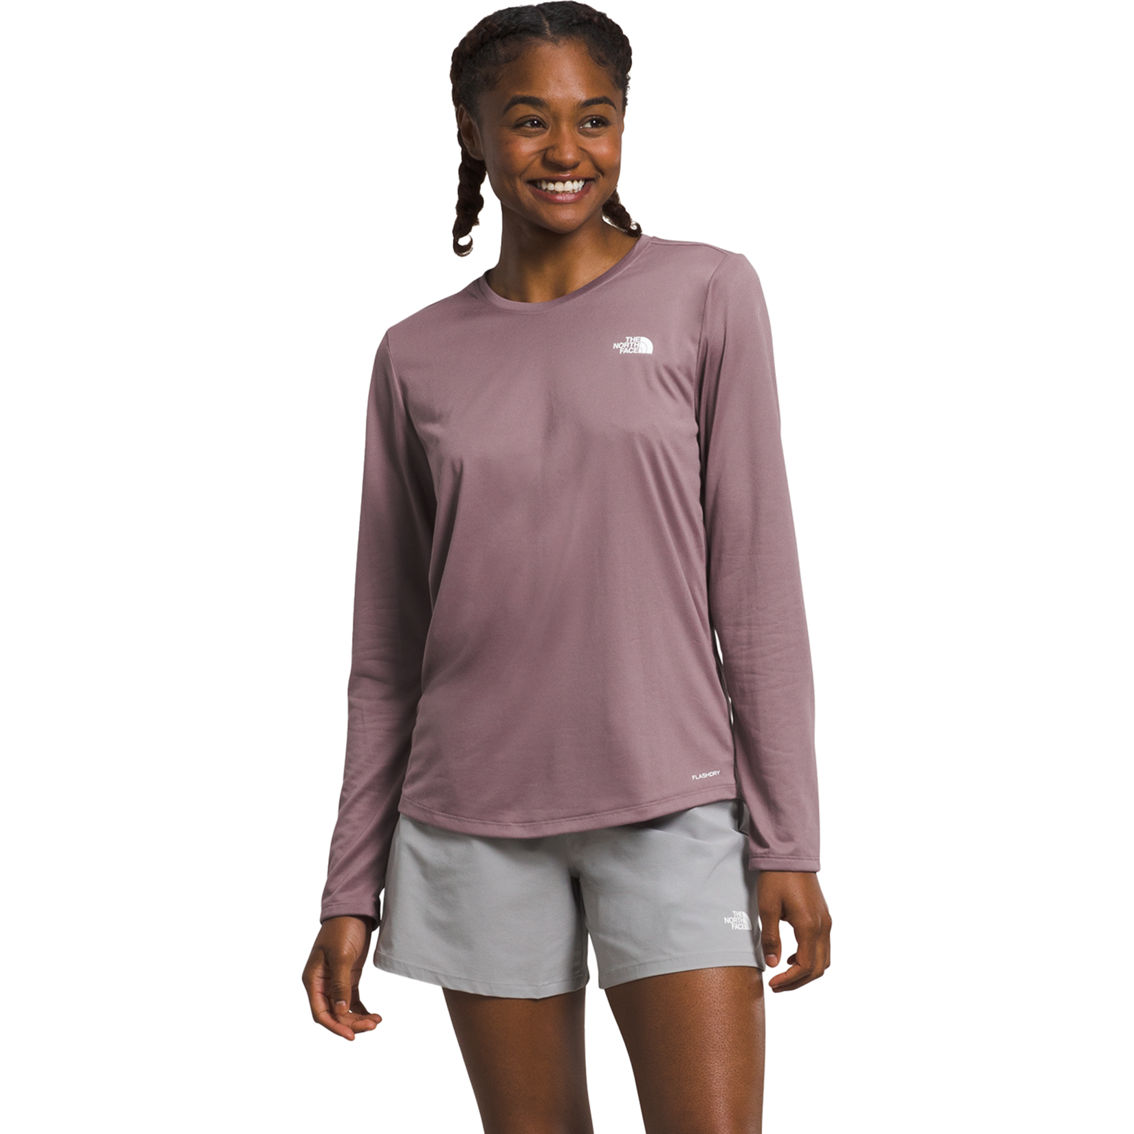 The North Face Elevation Shirt - Image 4 of 7